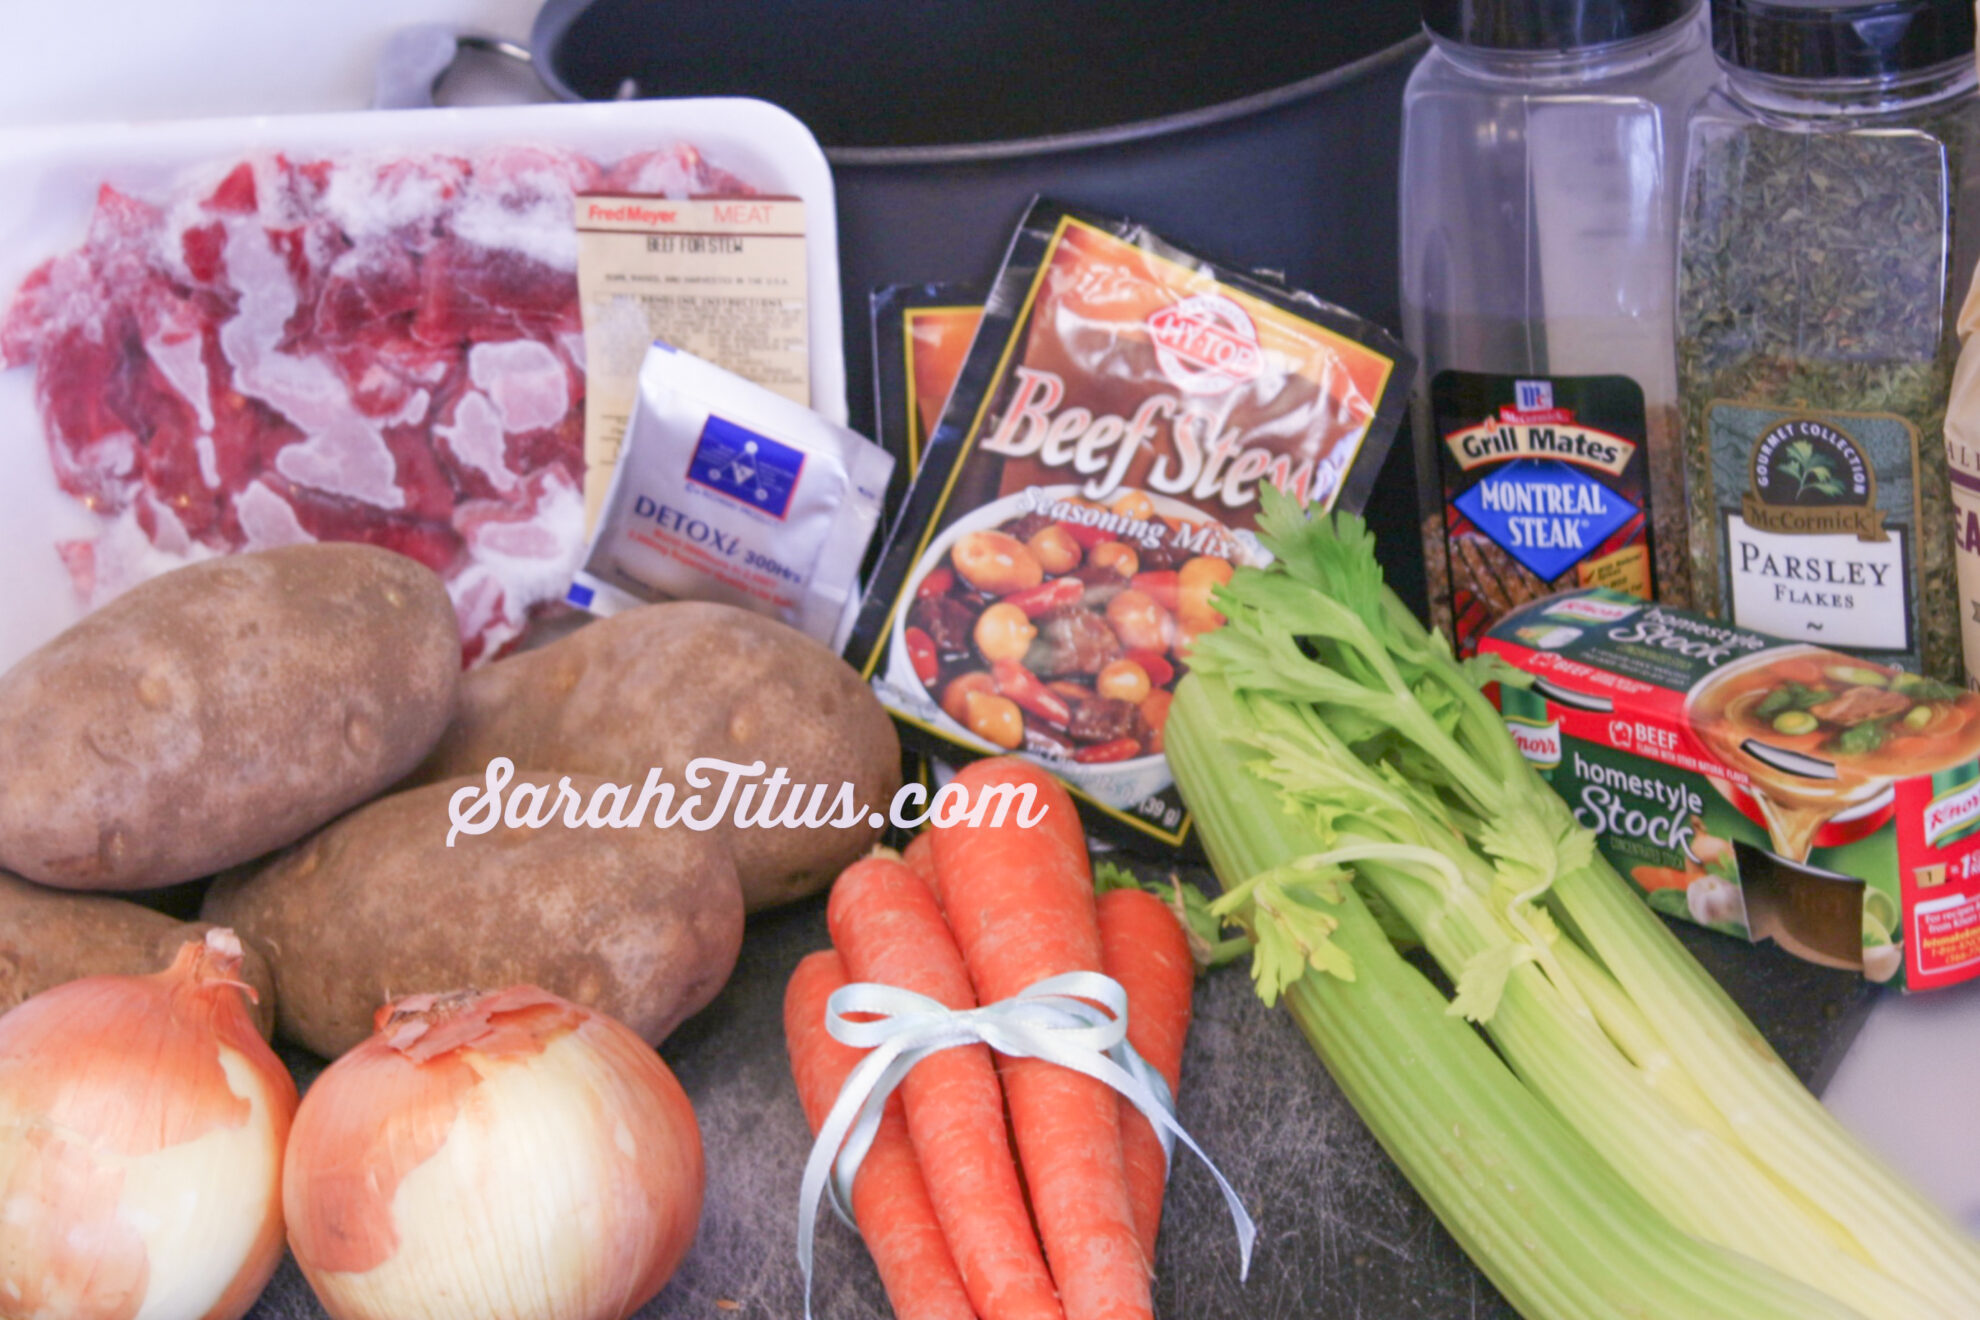 Everyone who eats my world's best beef stew says it's the best recipe they've ever tried. My family always asks me to make it & today, I'm sharing my secret recipe!